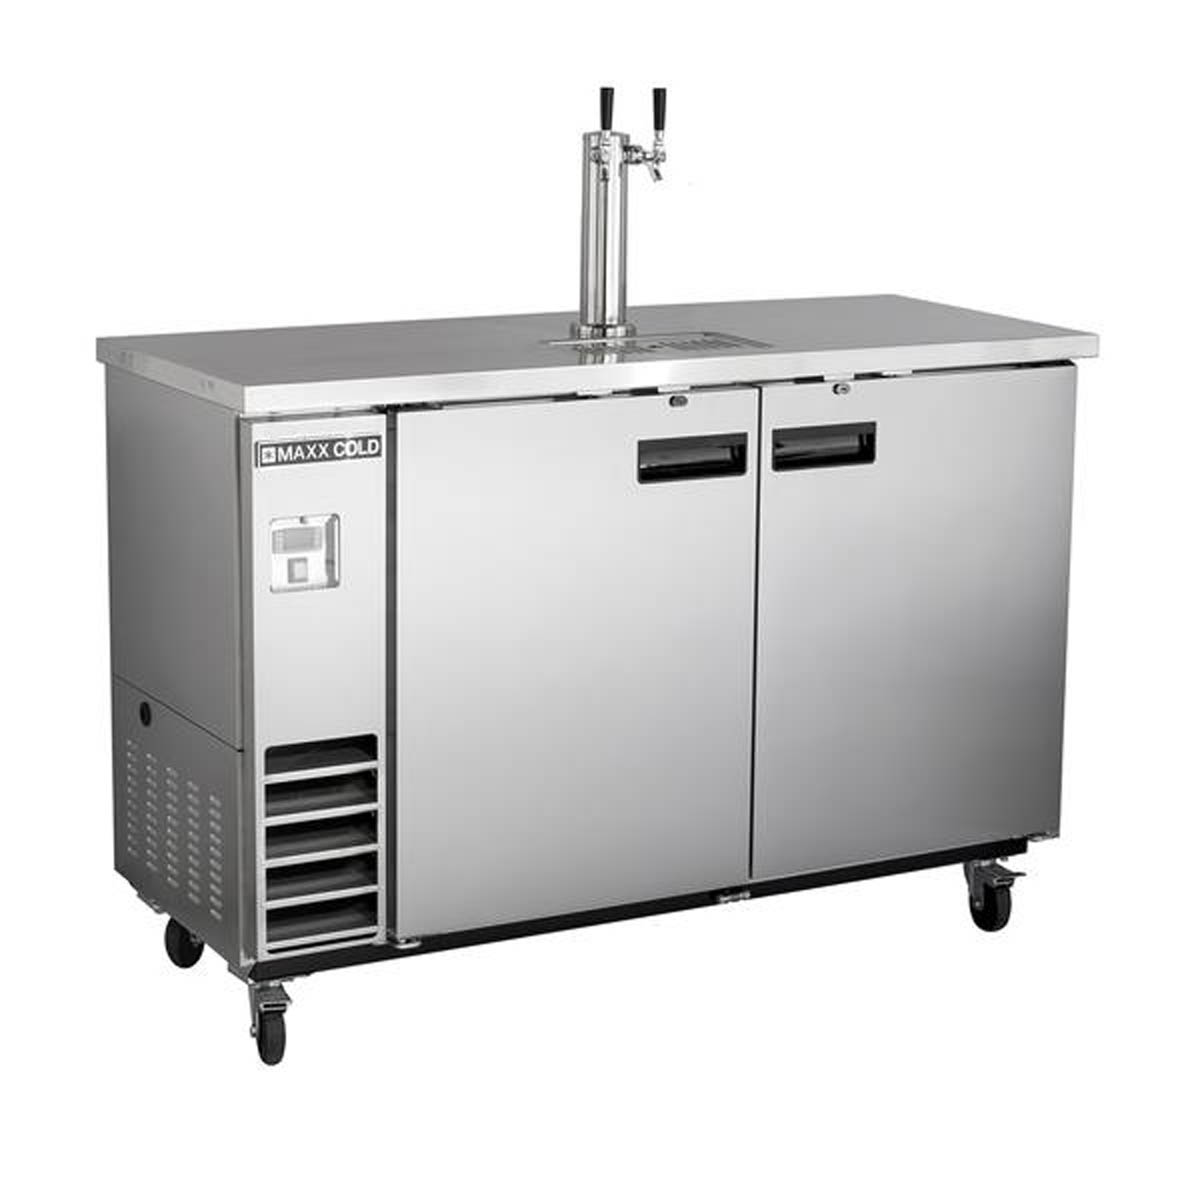 Maxx Cold MXBD60-1SHC 61″ Draft Beer Cooler w/ 2 Kegs, 14.2 cu. ft., 1 Dual-Tap Tower